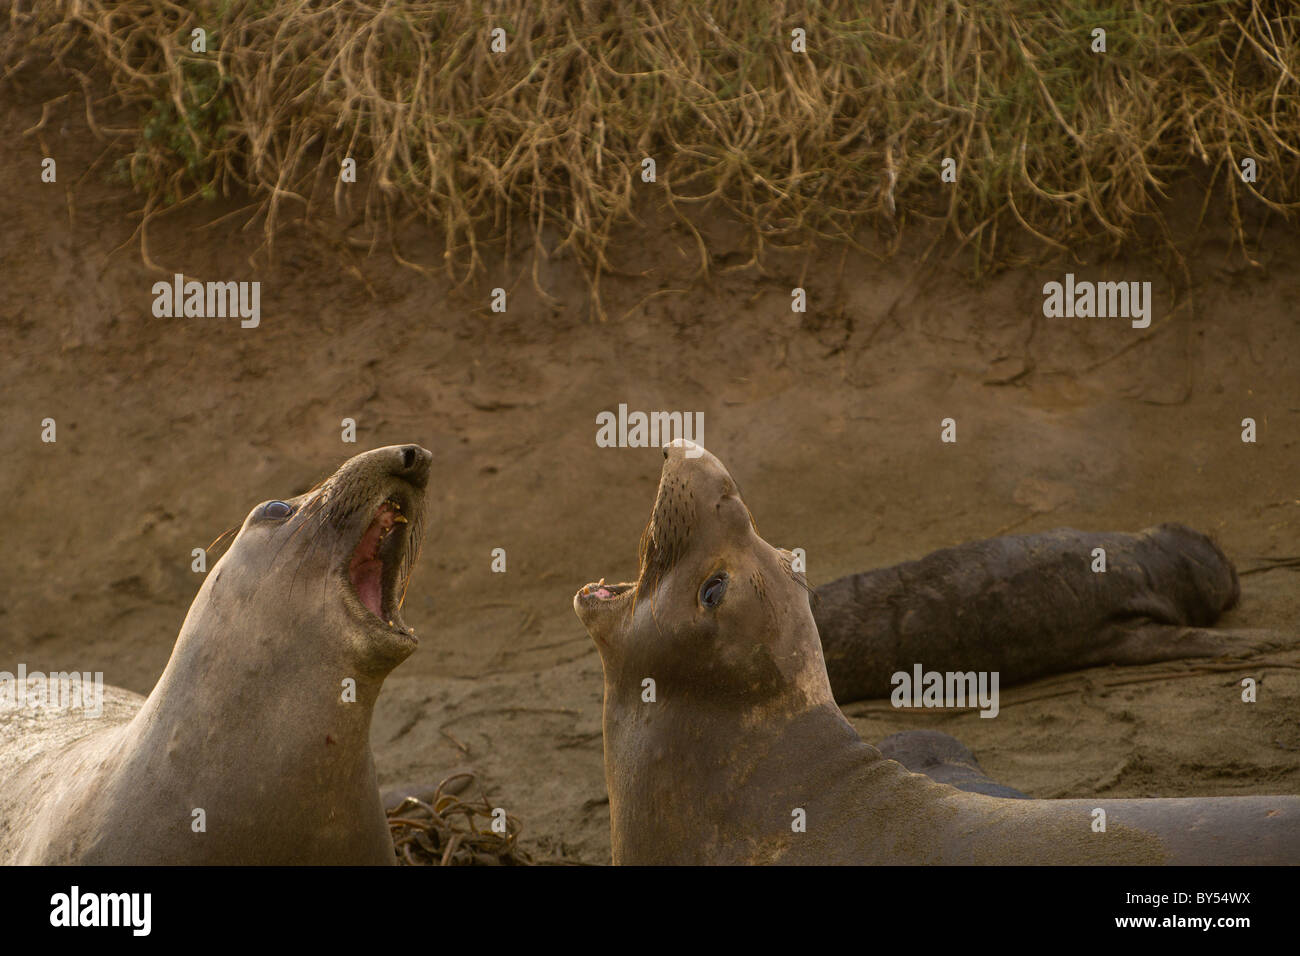 Two female Northern Elephant Seals (Mirounga angustirostris) fighting at the Piedras Blancas rookery in near San Simeon Central California. Stock Photo